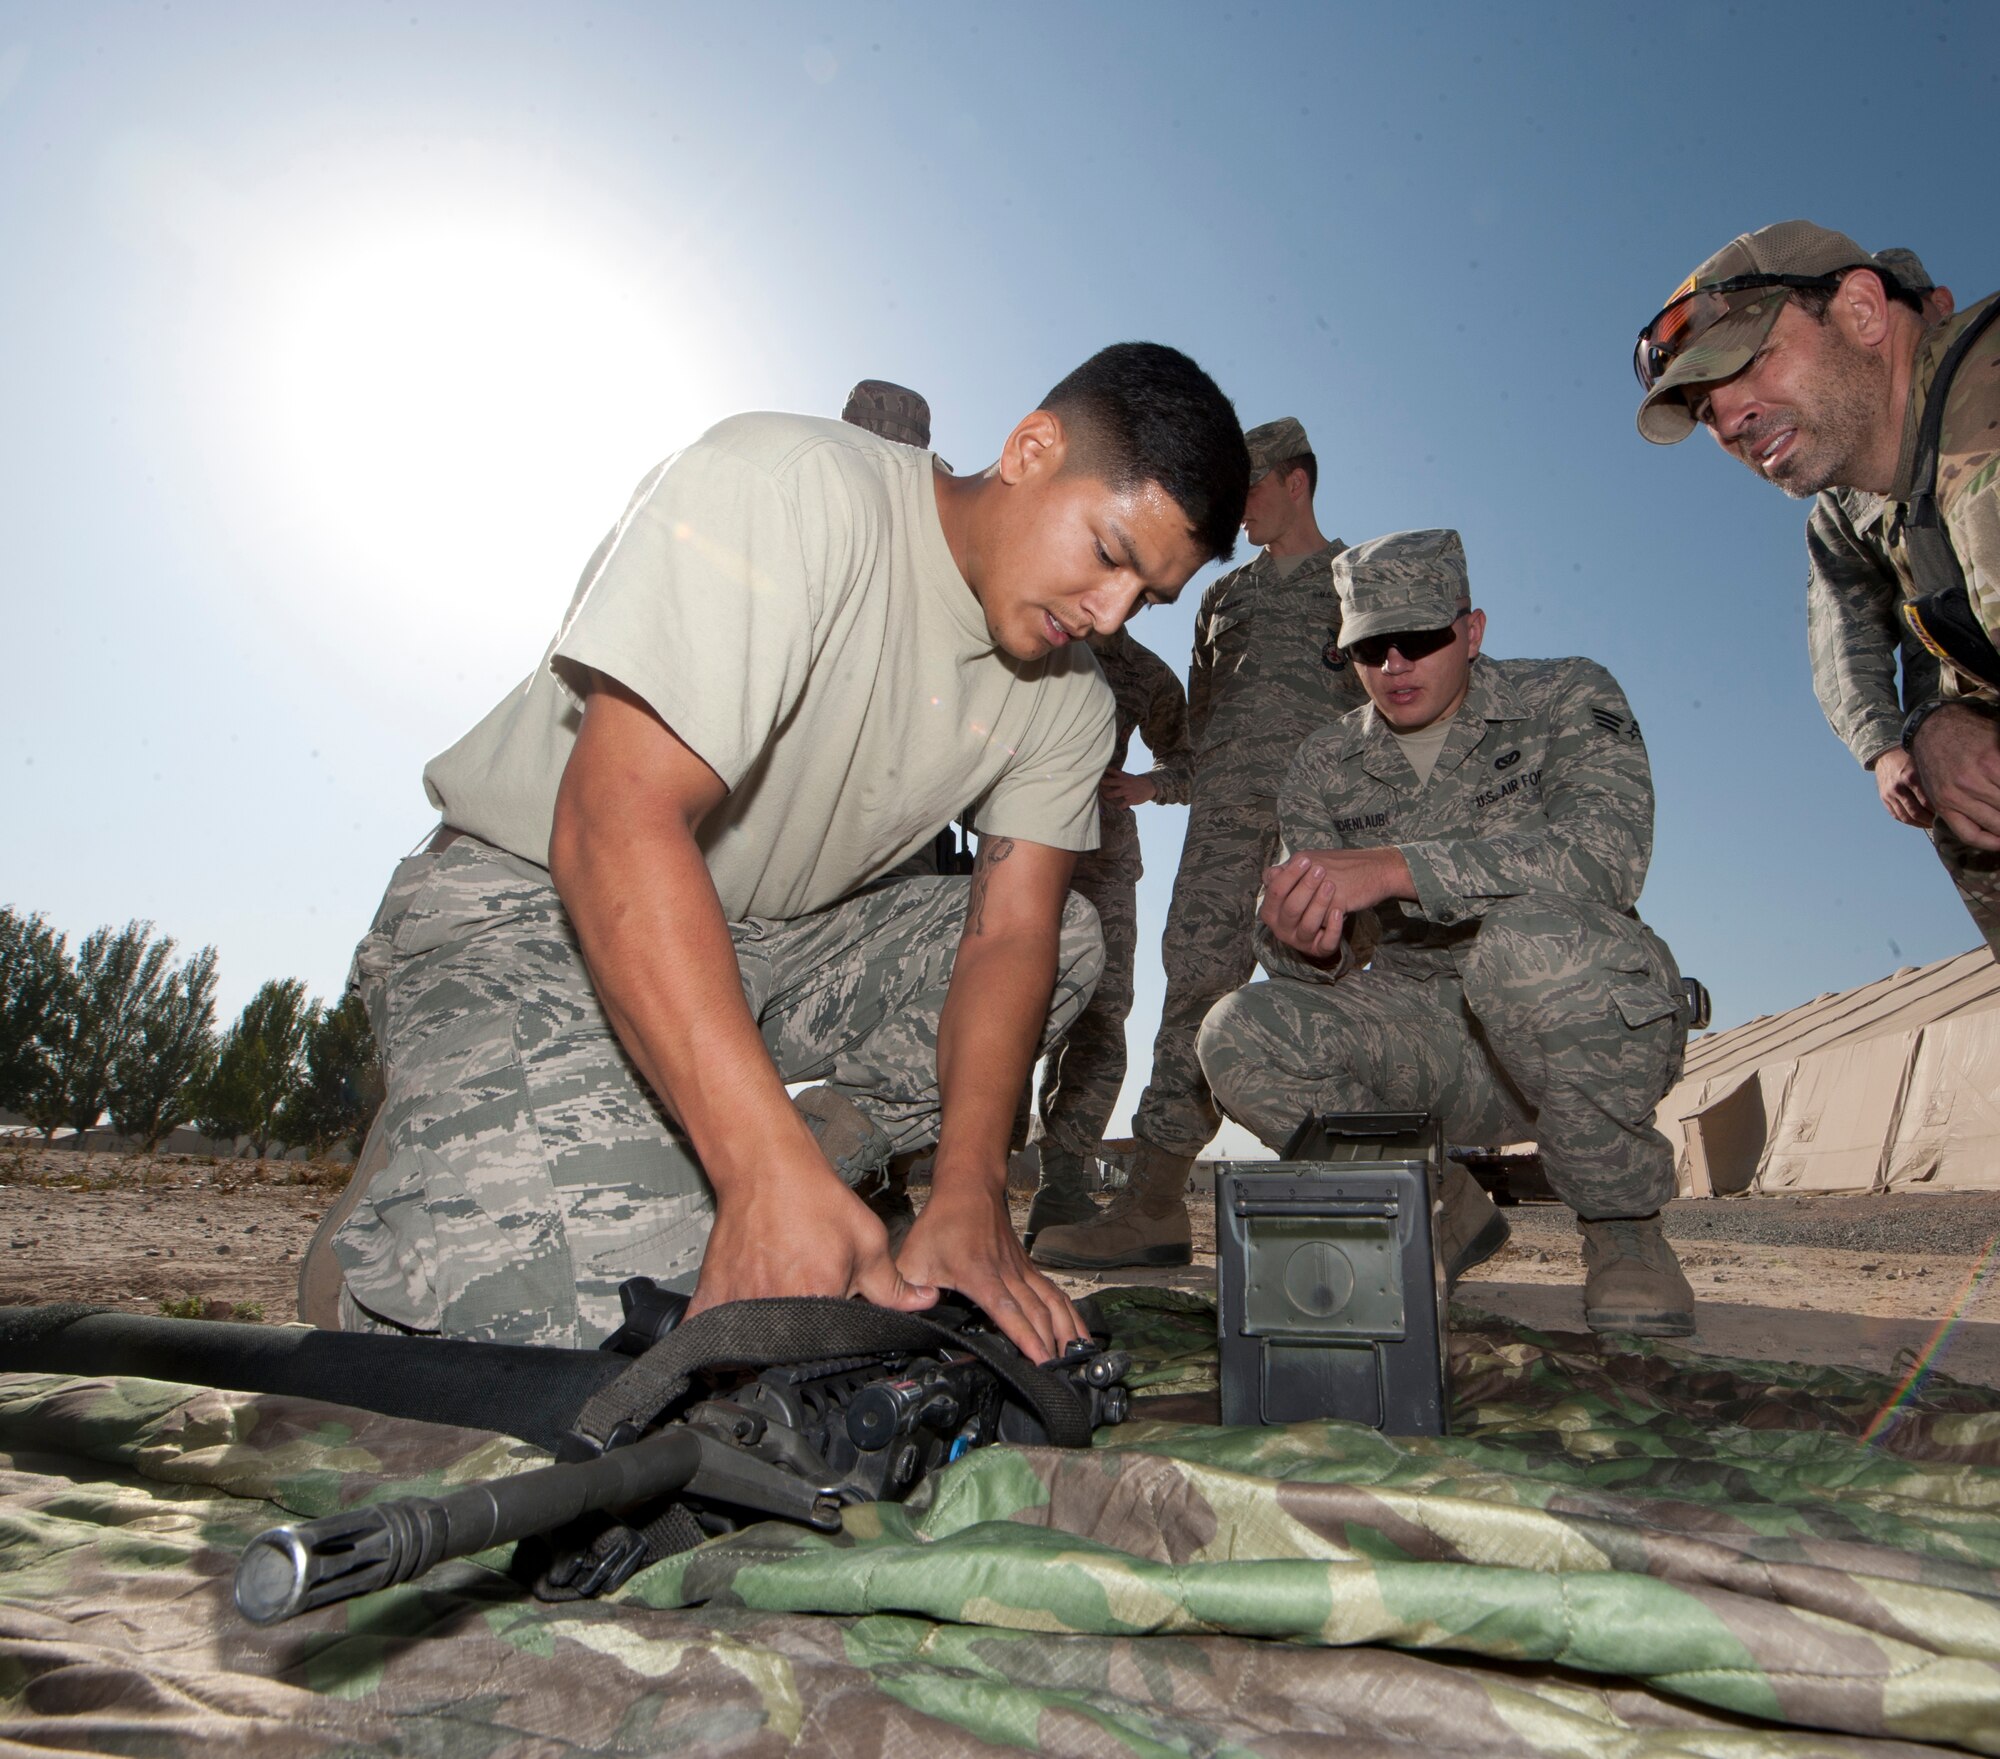 Senior Airman Jamie Oseguera, 376th Expeditionary Security Forces Squadron entry controller, puts together an M-4 rifle during "Battle of the Badges" at Transit Center at Manas, Krygyzstan, Sept. 26, 2013. Oseguera is deployed out of Hansom Air Force Base, Mass., and is a native of Hughson, Calif. (U.S. Air Force photo/Staff Sgt. Robert Barnett)